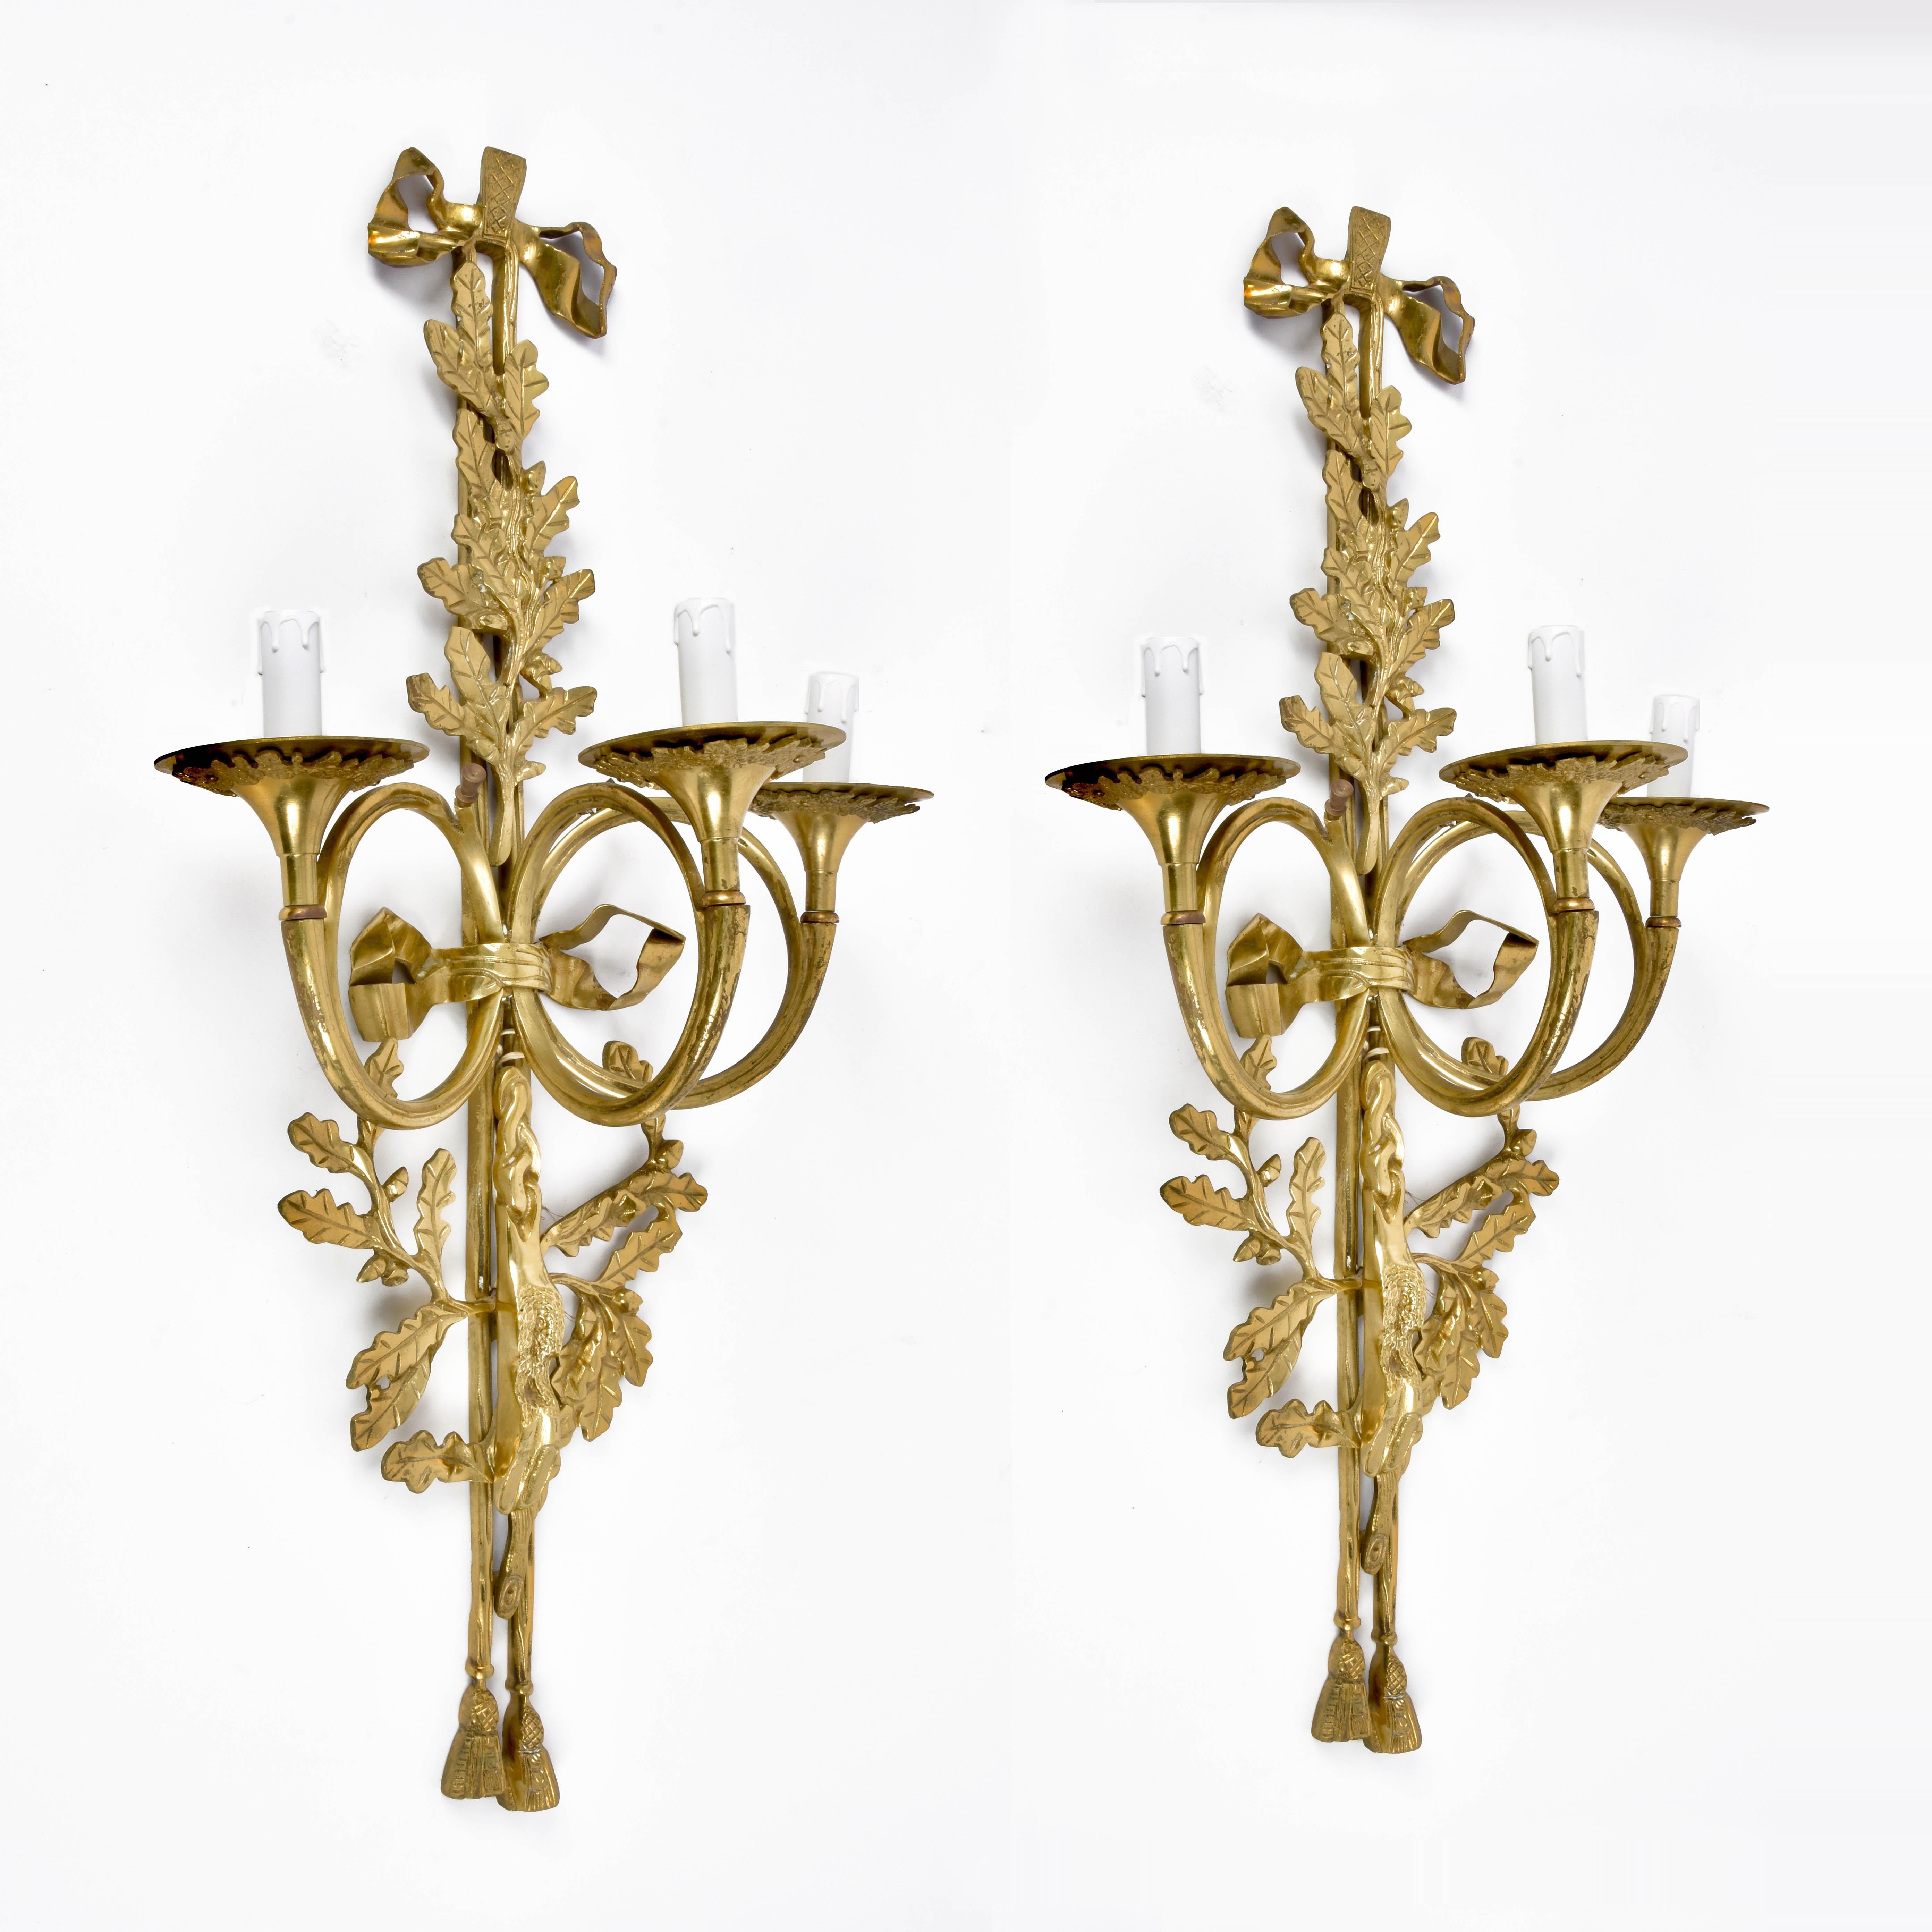 Mid-20th Century Pair of Neoclassical Solid Brass Three-Arm Trumpet French Wall Sconces, 1930s